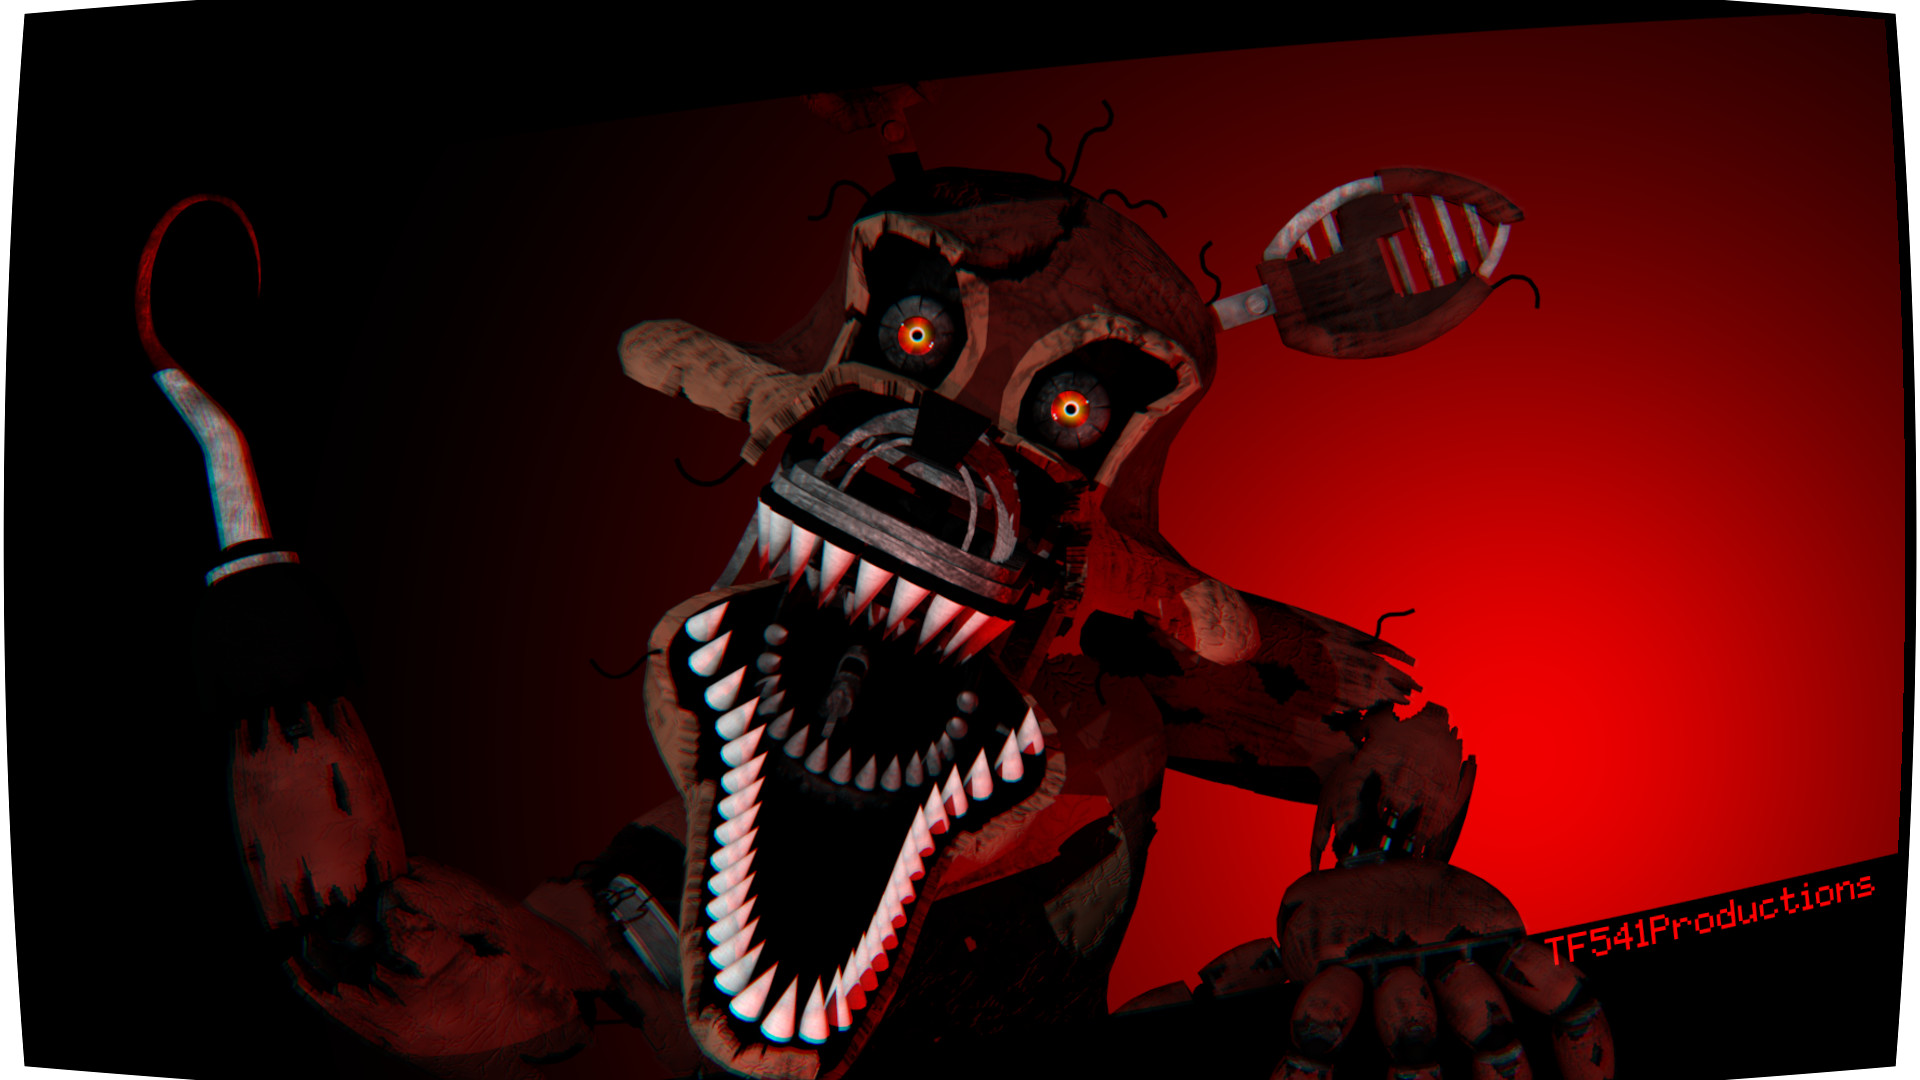 1920x1080 Made a simple Nightmare Foxy Wallpaper. 